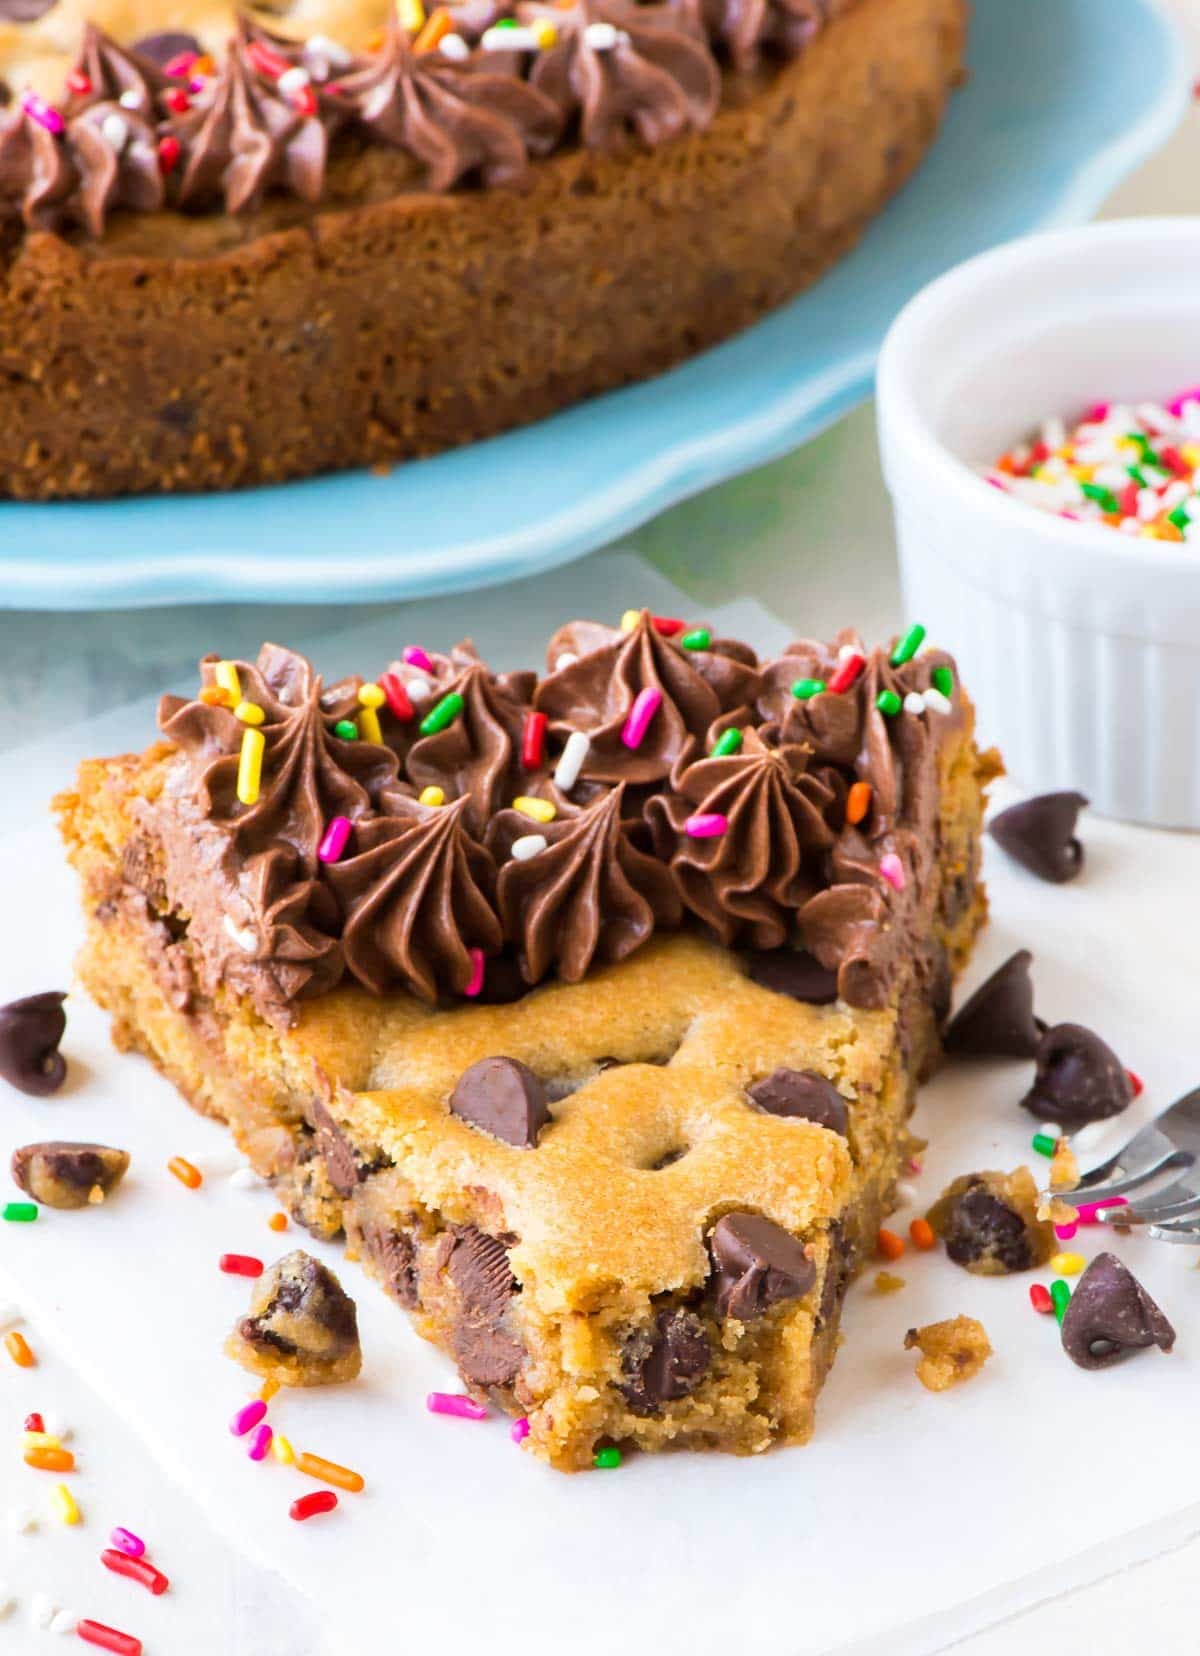 Chocolate Chip Cookie Cake Recipe with Chocolate Fudge Frosting